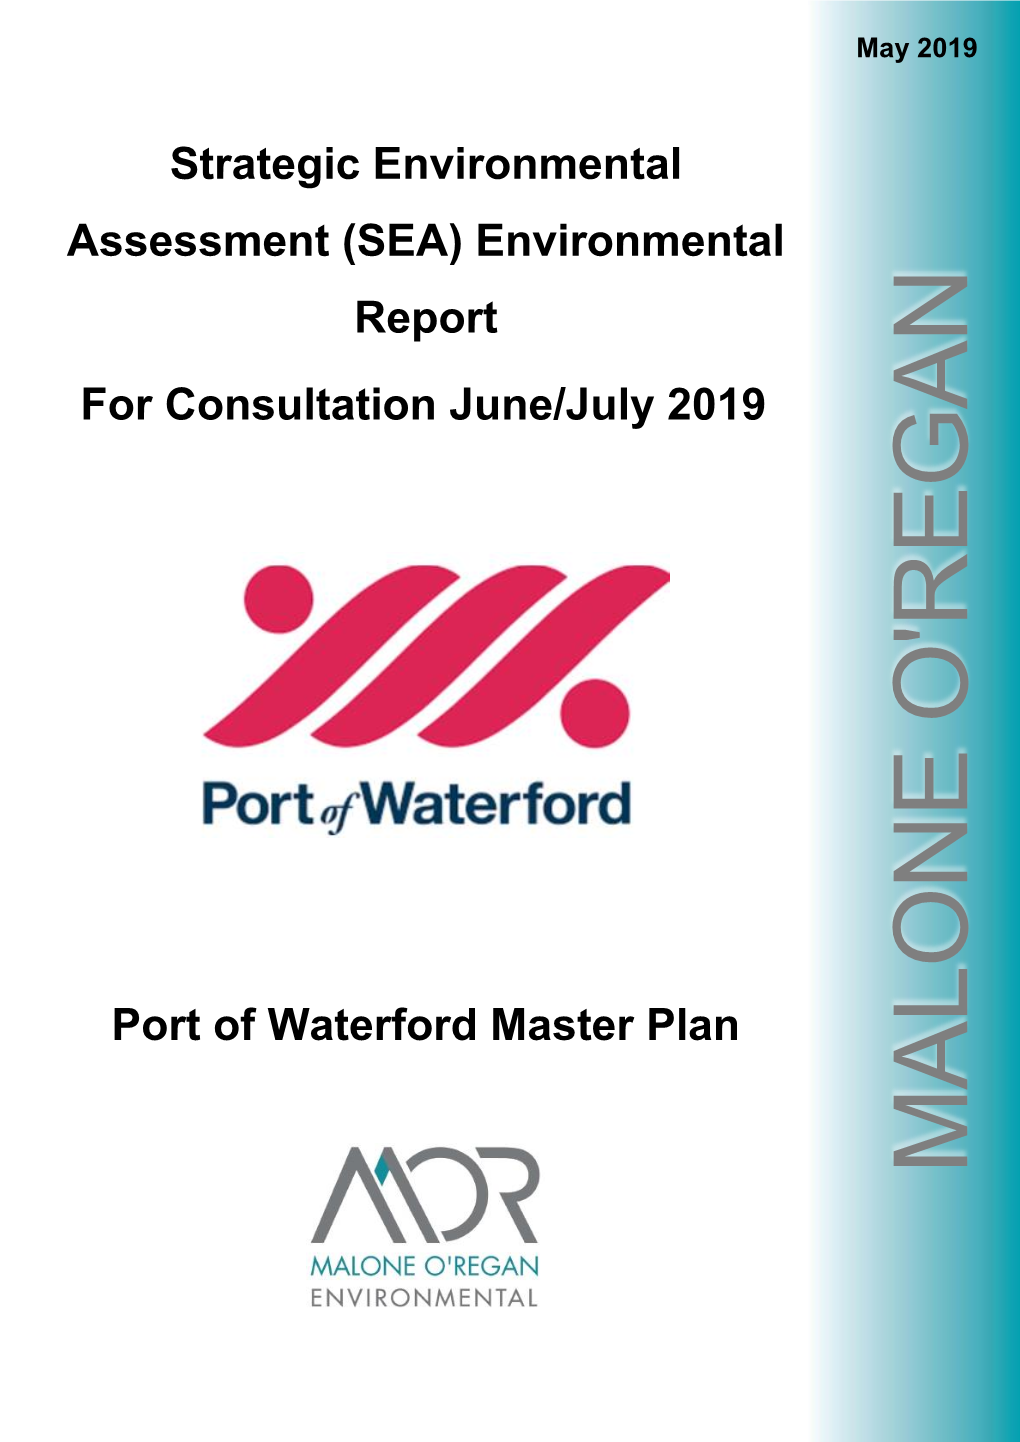 Strategic Environmental Assessment (SEA) Environmental Report, Port of Waterford Master Plan, Port of Waterford Company